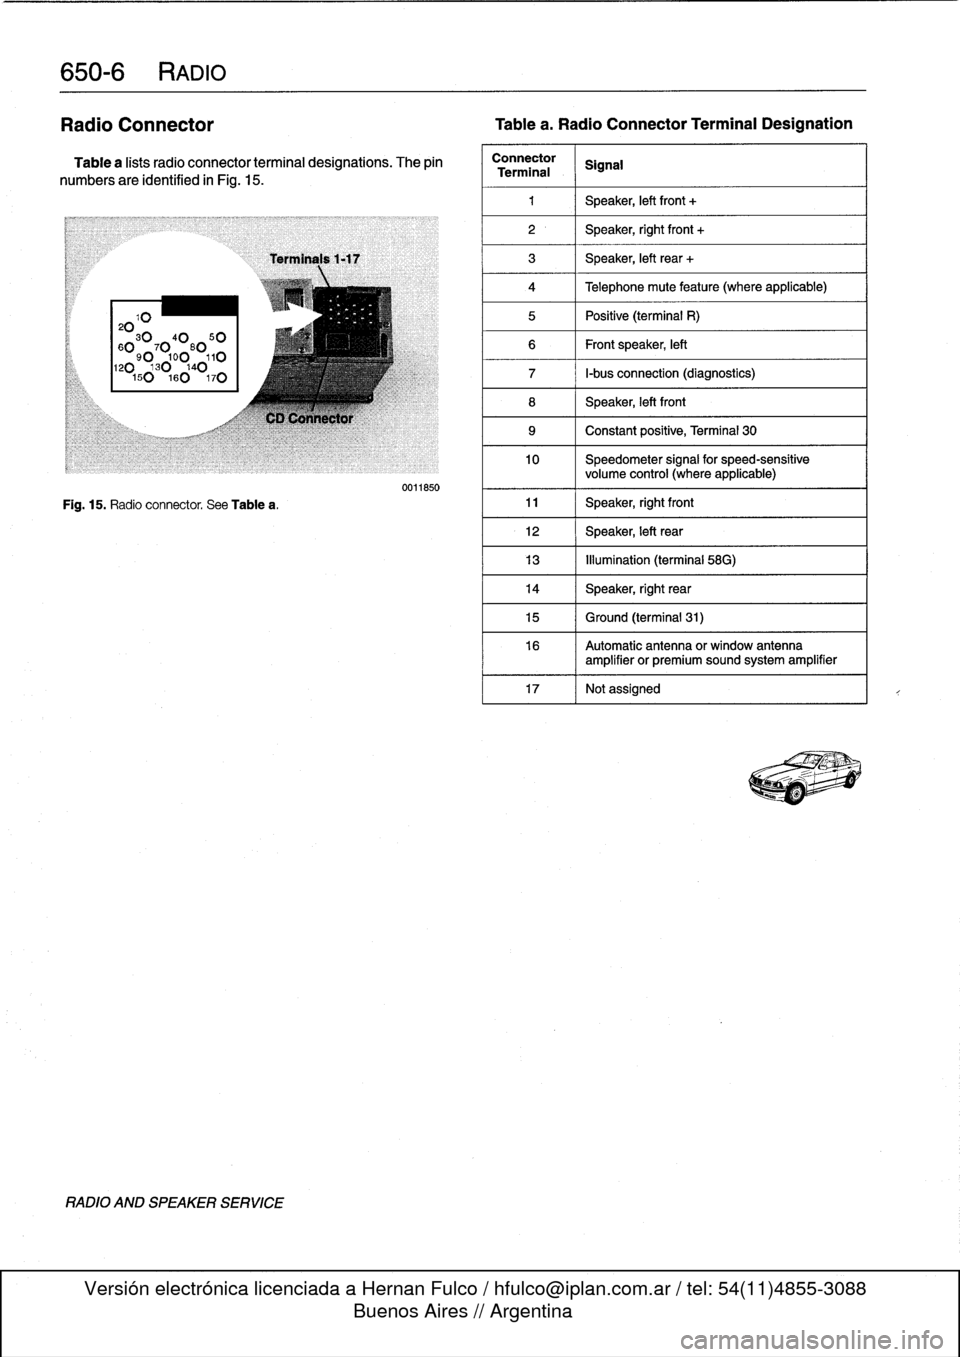 BMW M3 1996 E36 User Guide 
650-
6
RADIO

Radio
Connector

	

Tablea
.
Radio
Connector
Terminal
Designation

Table
a
lists
radio
connector
terminal
designations
.
The
pin

numbers
are
identified
in
Fig
.
15
.

20103040
50

60
9